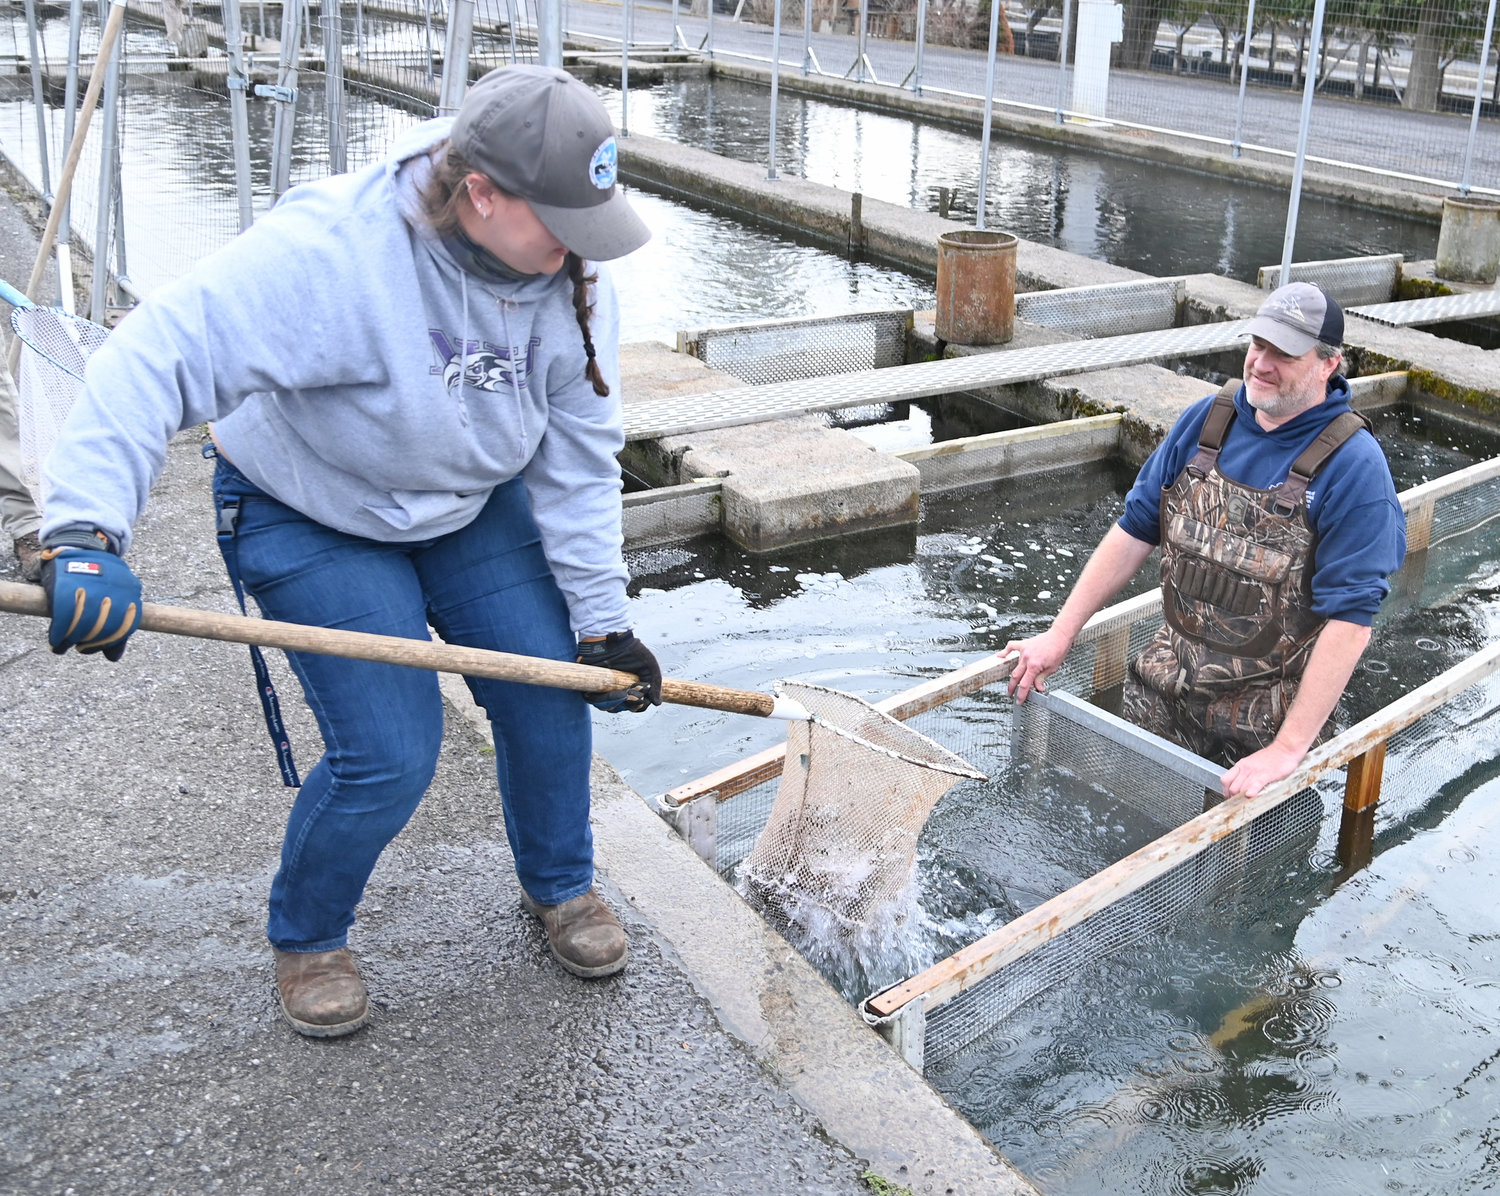 SCOOPING THEM UP — Fish hatchery culturist Liz Kelsey Gossard and Steve Grabowski corral nine-inch brown trout as stocking efforts from the Rome Fish Hatchery are ongoing.